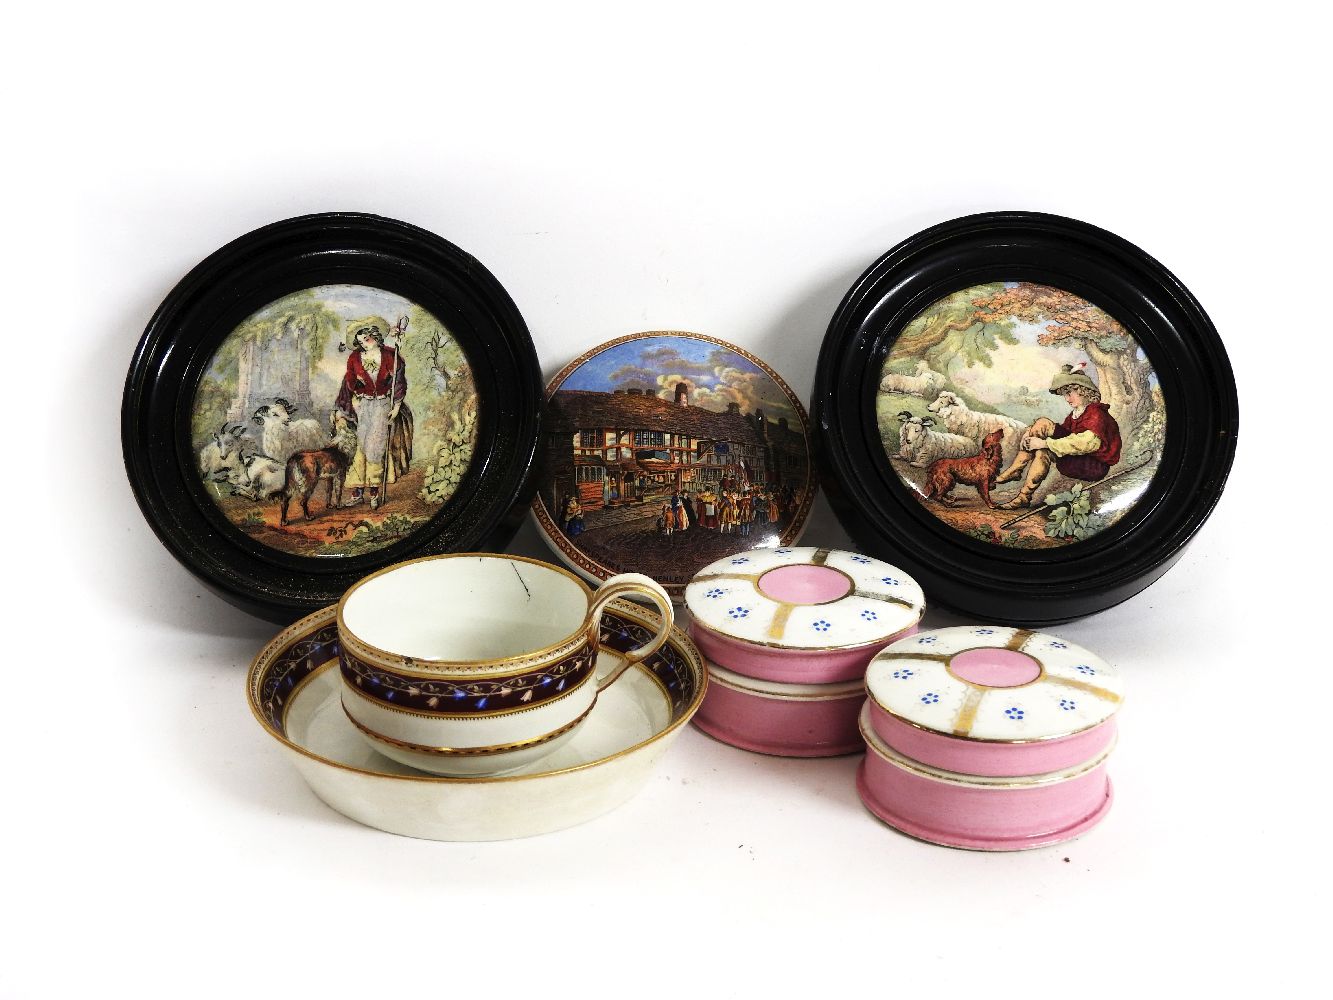 A pair of 19th century pot lids depicting rural scenes, one other pot lid of a country Inn, a 19th